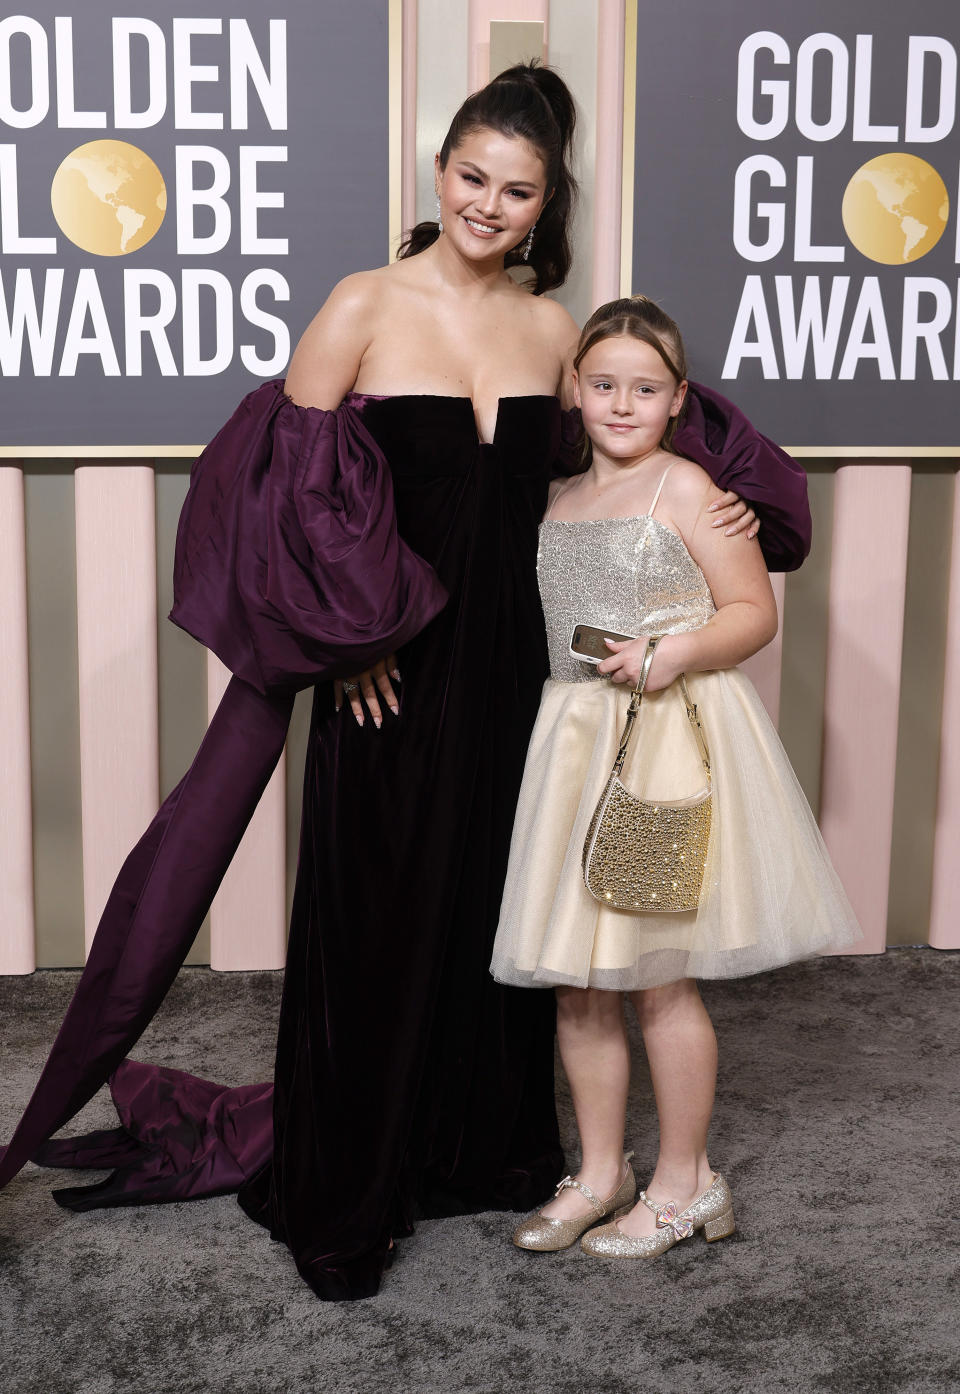 Selena with her sister on the Golden Globes red carpet